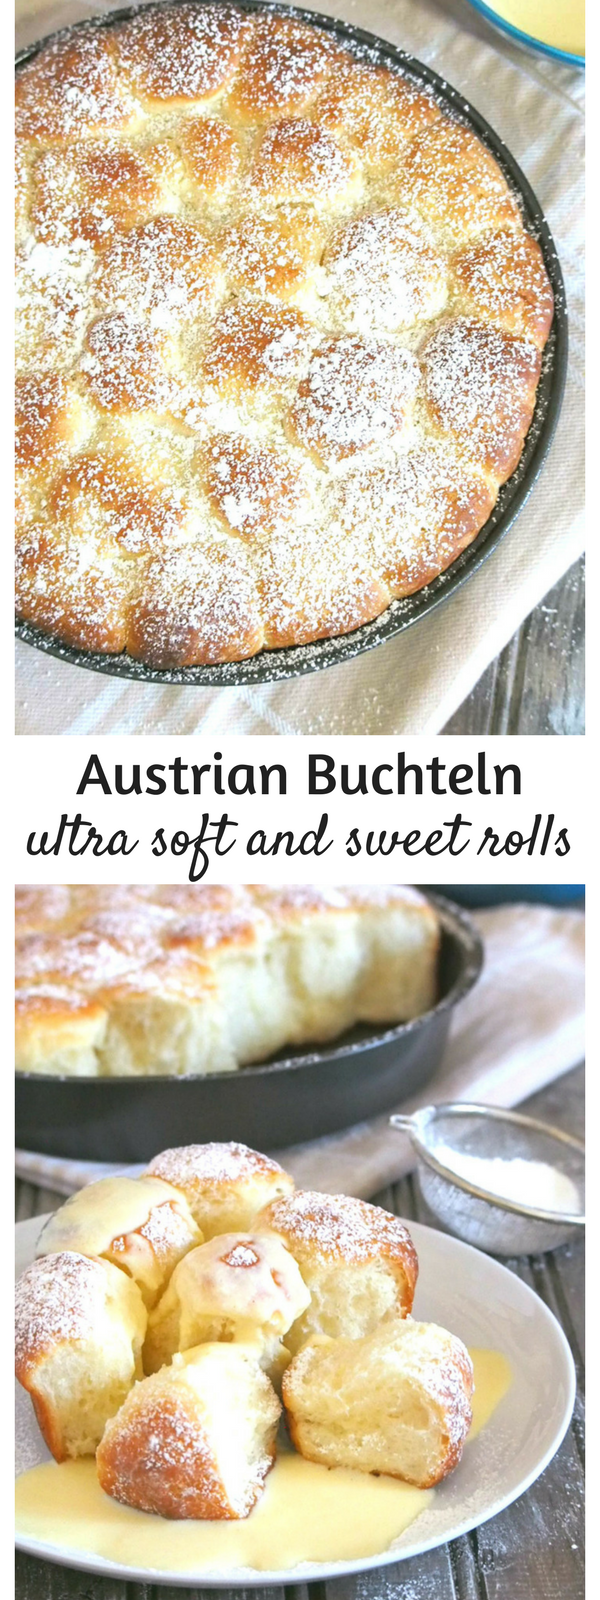 Buchteln are sweet, yeast rolls originated from Austria that are characterized by their light and airy texture. These buttery and sweet rolls are served with vanilla custard sauce but they are often filled with apricot jam in the center.